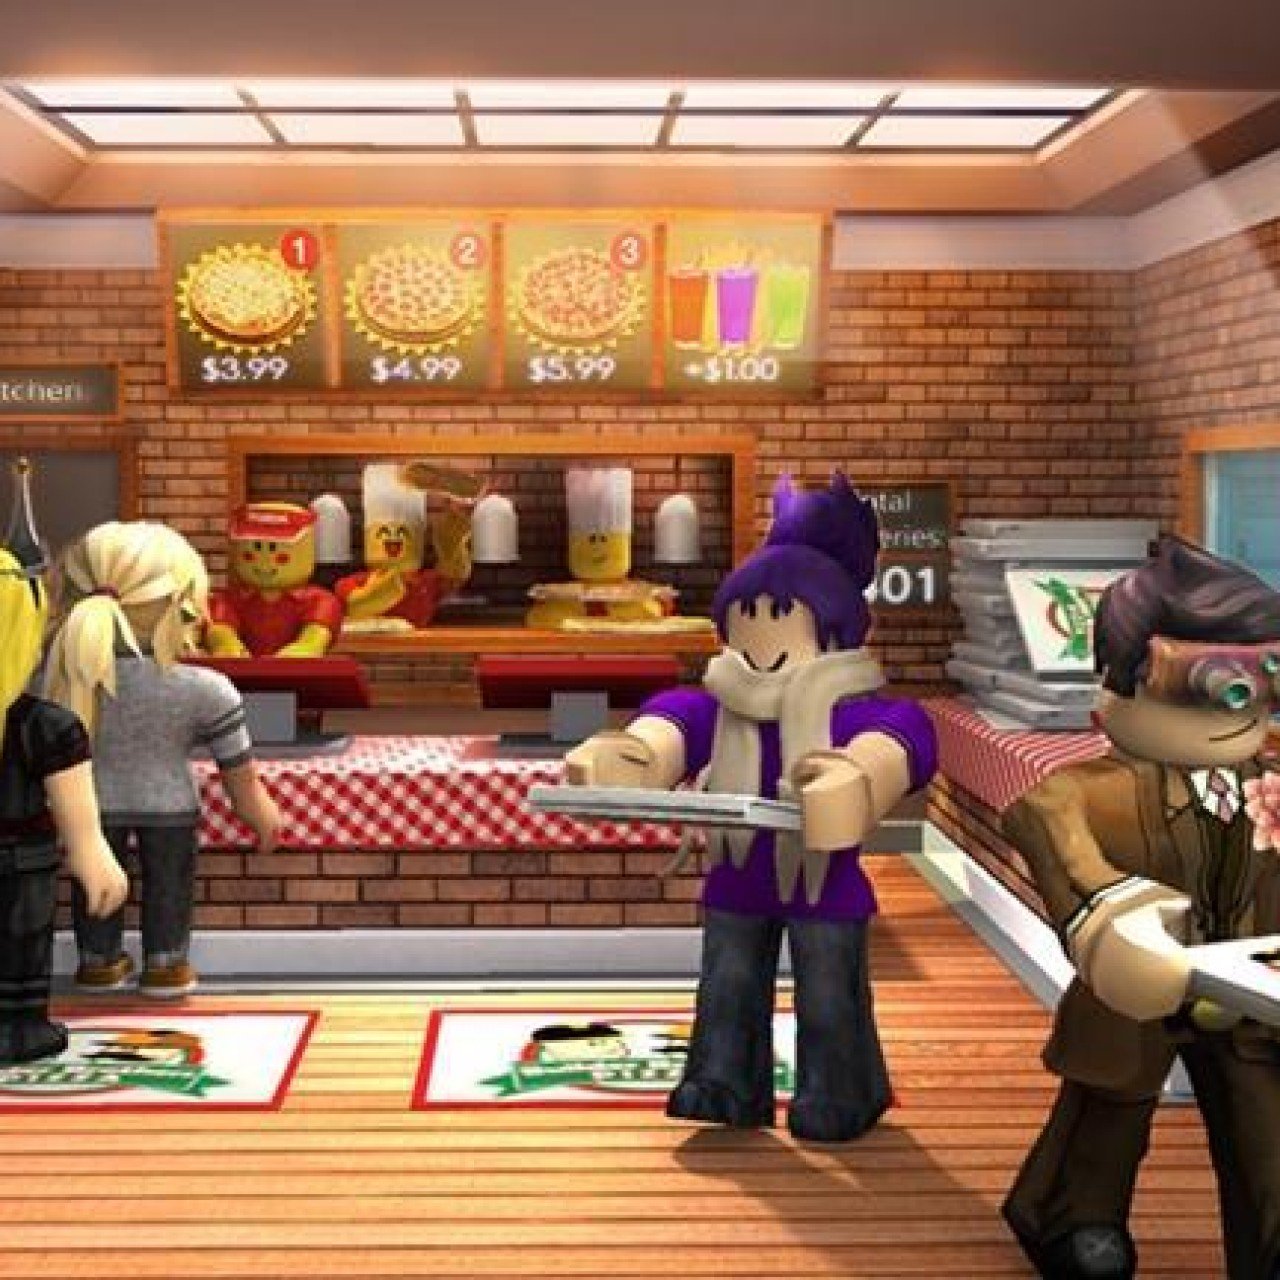 Hong Kong S Current Legco Members Will Continue To Serve For One Year Says Beijing Yp South China Morning Post - work at a pizza place roblox mira in 2019 roblox pizza